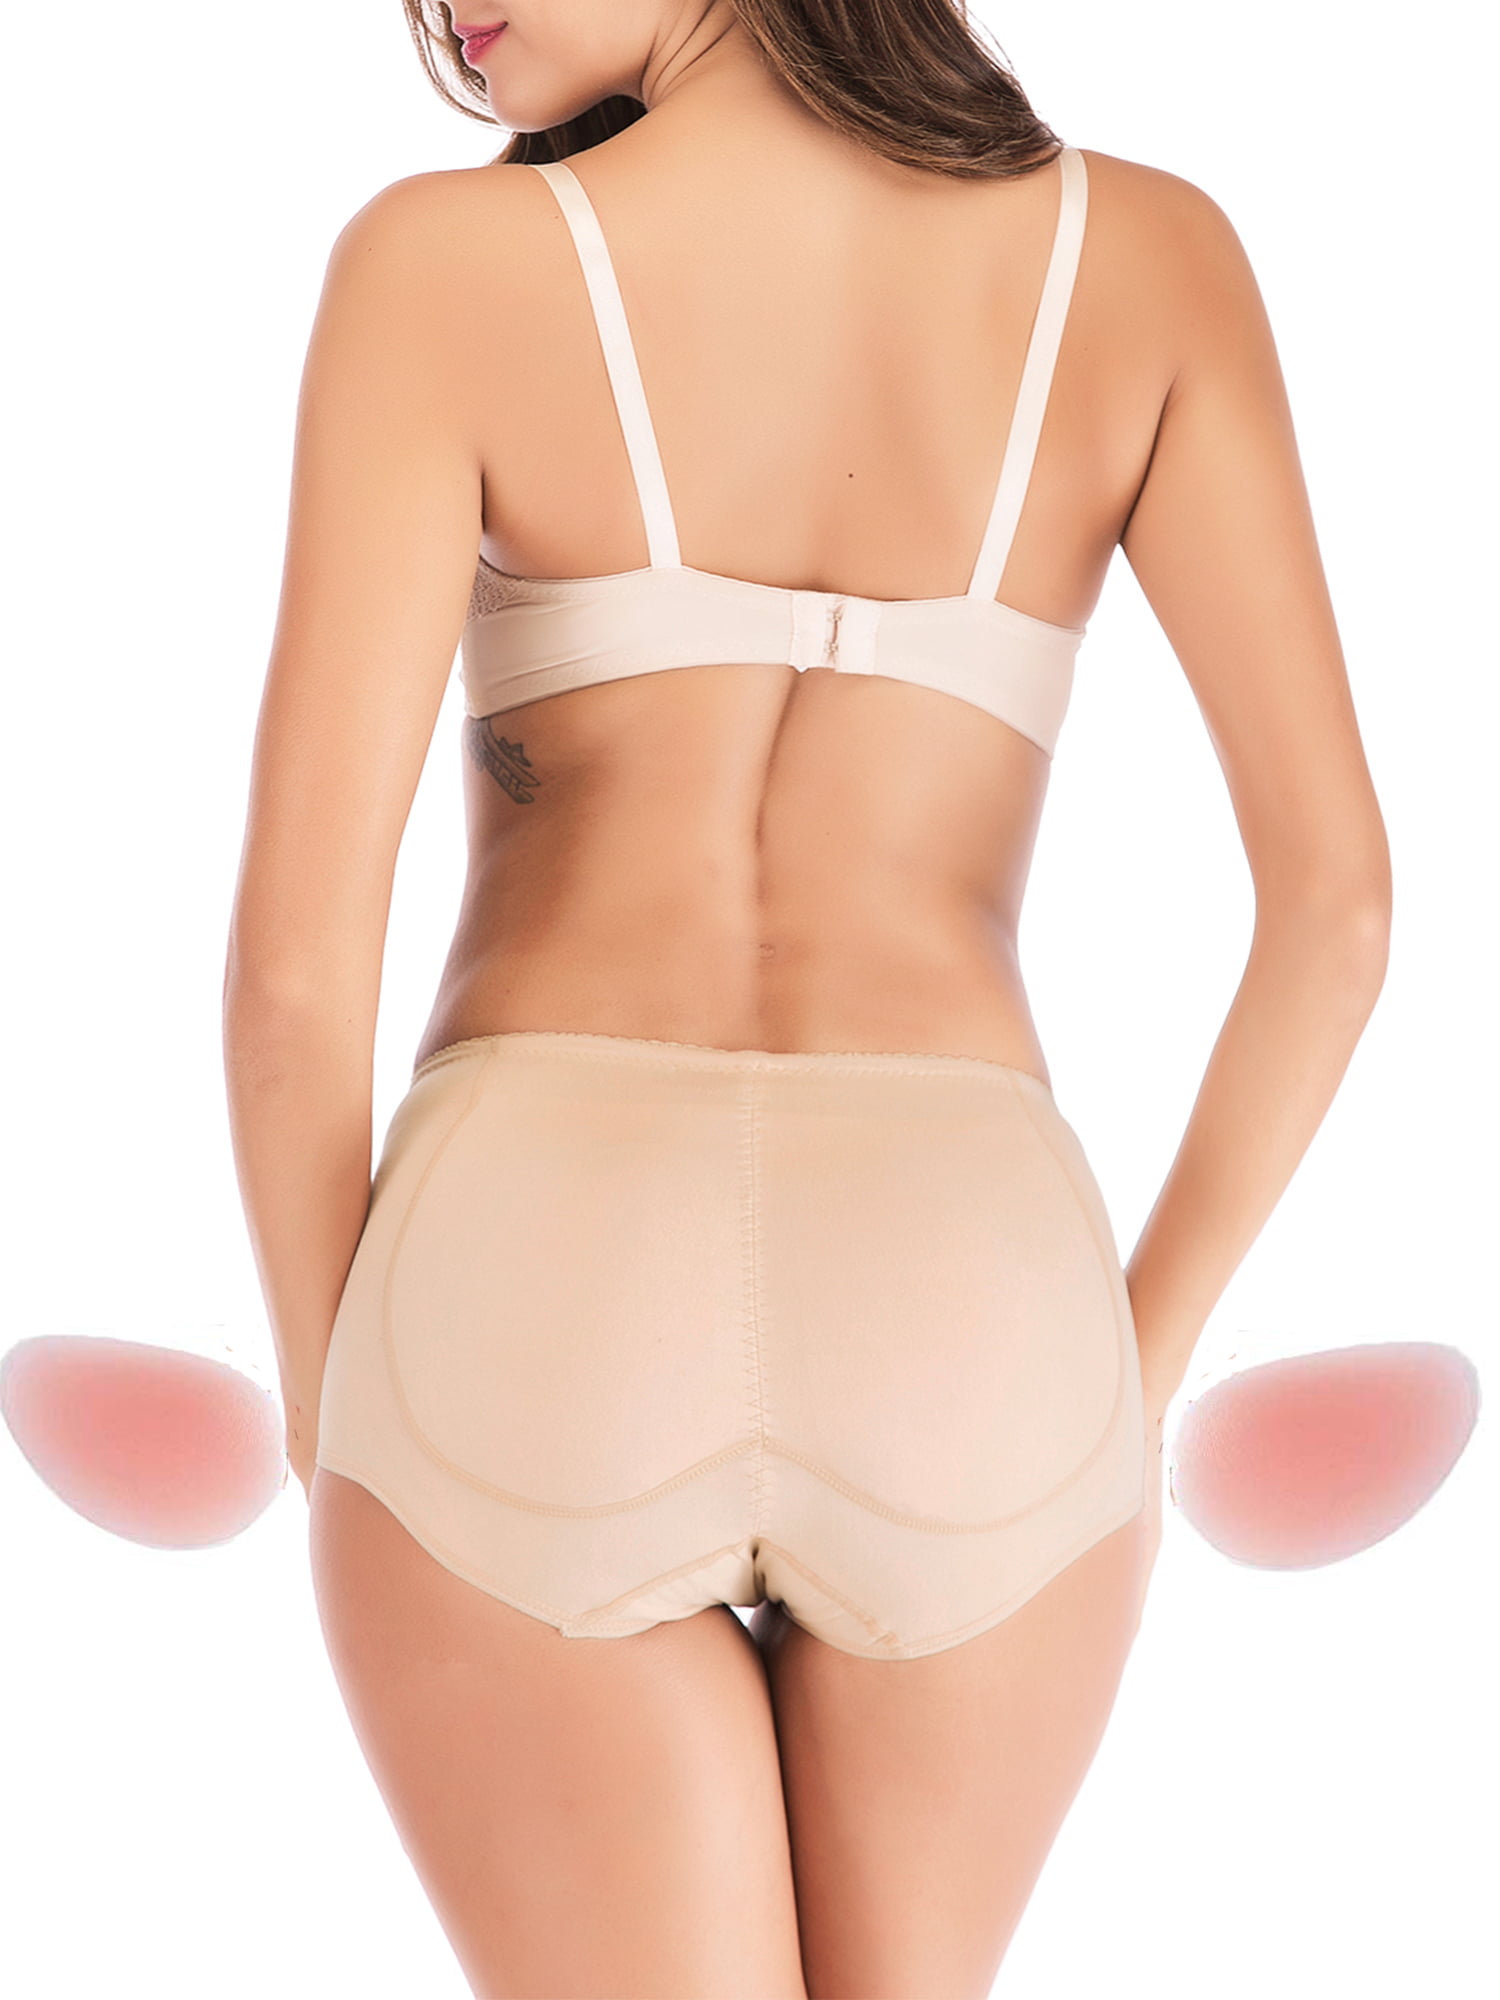 LAFGUR Women Underwear Hip With Silicone Pad Fake Buttock Butt Padded TY 